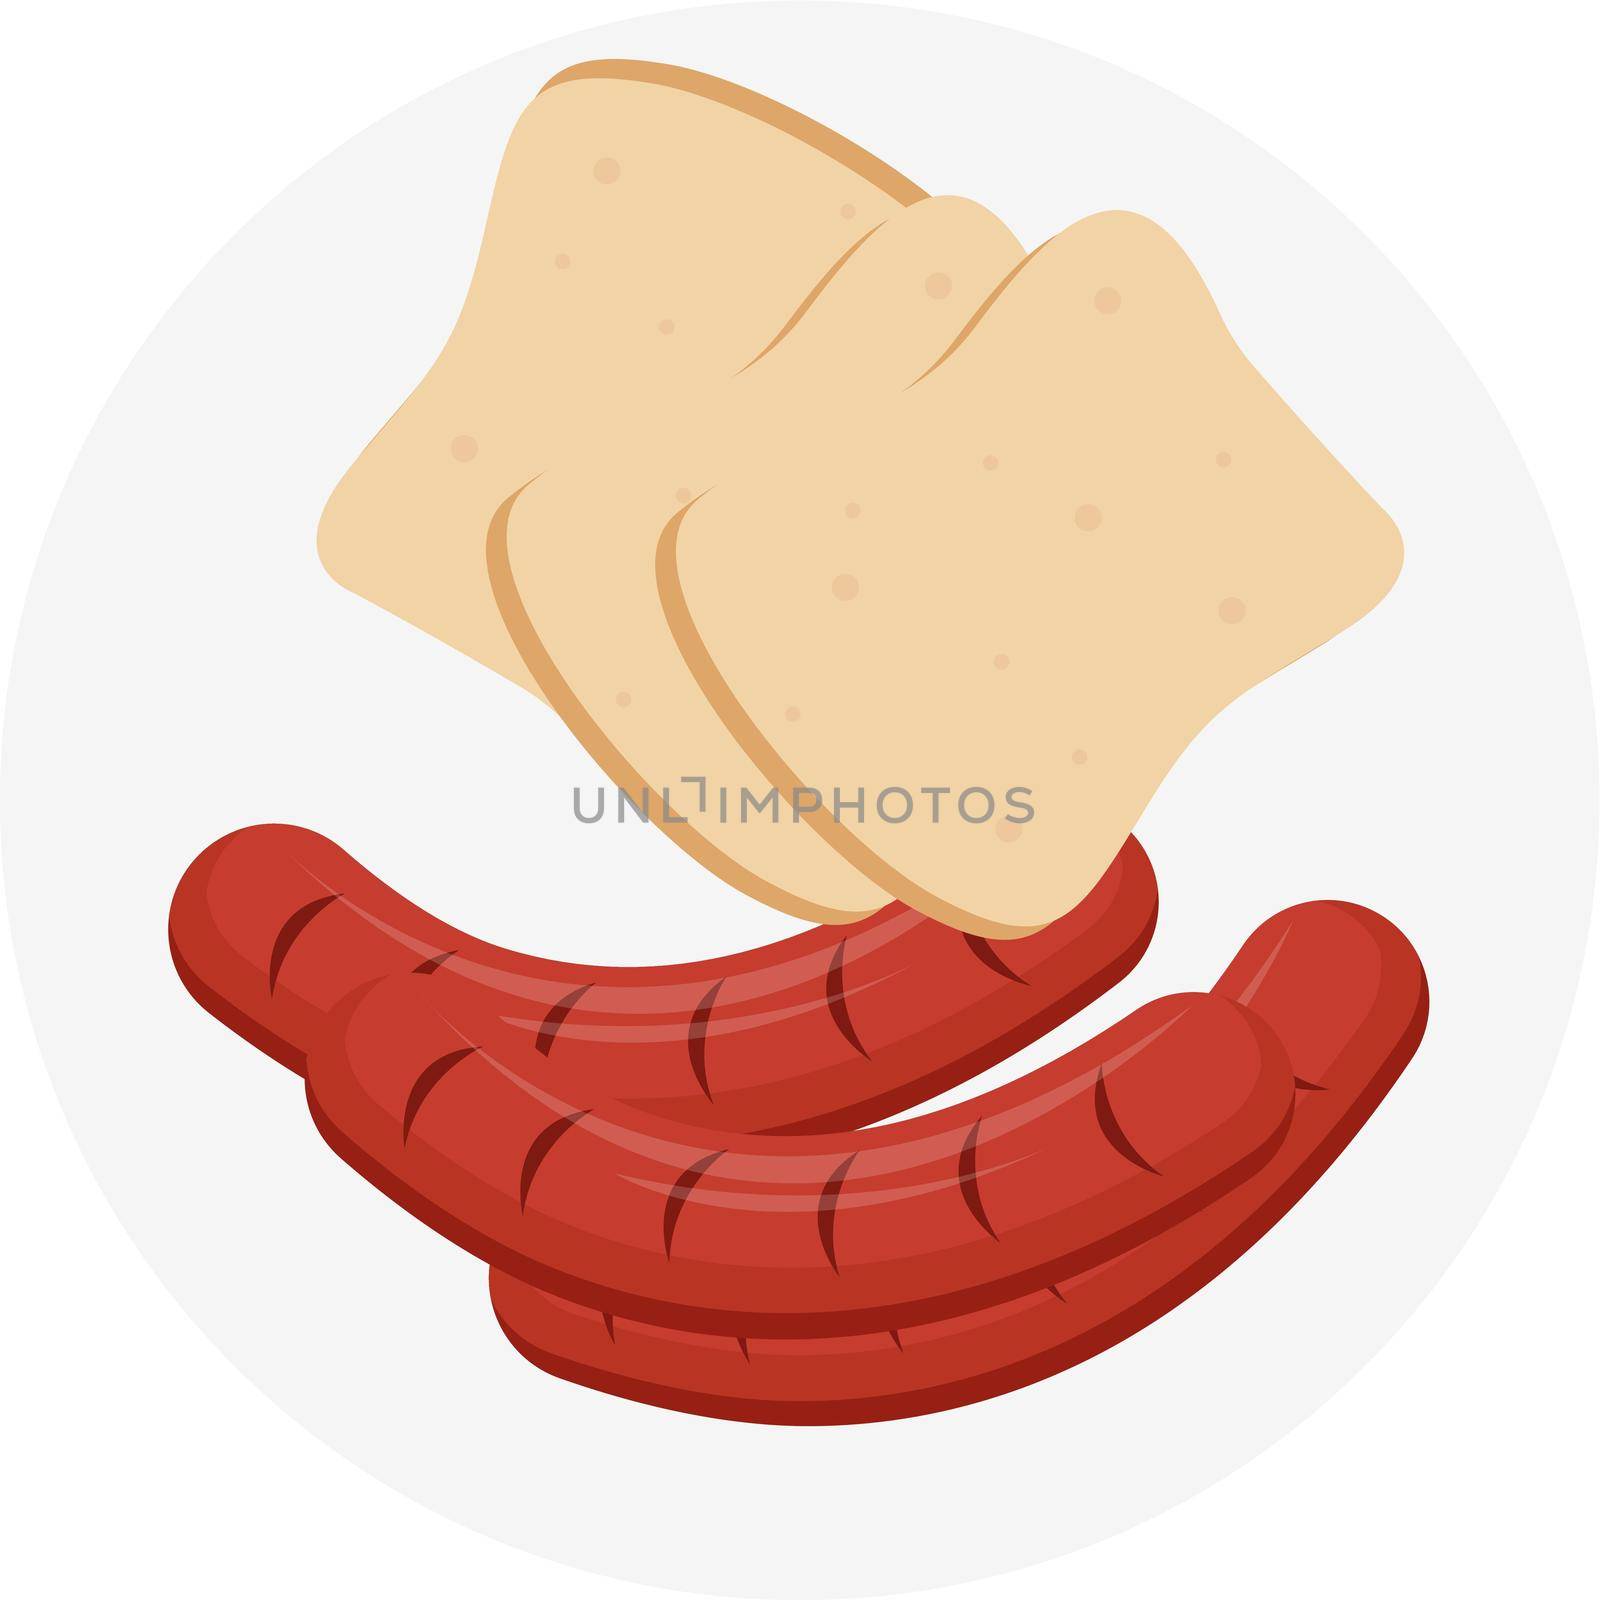 Sausage and bread, illustration, vector on white background.